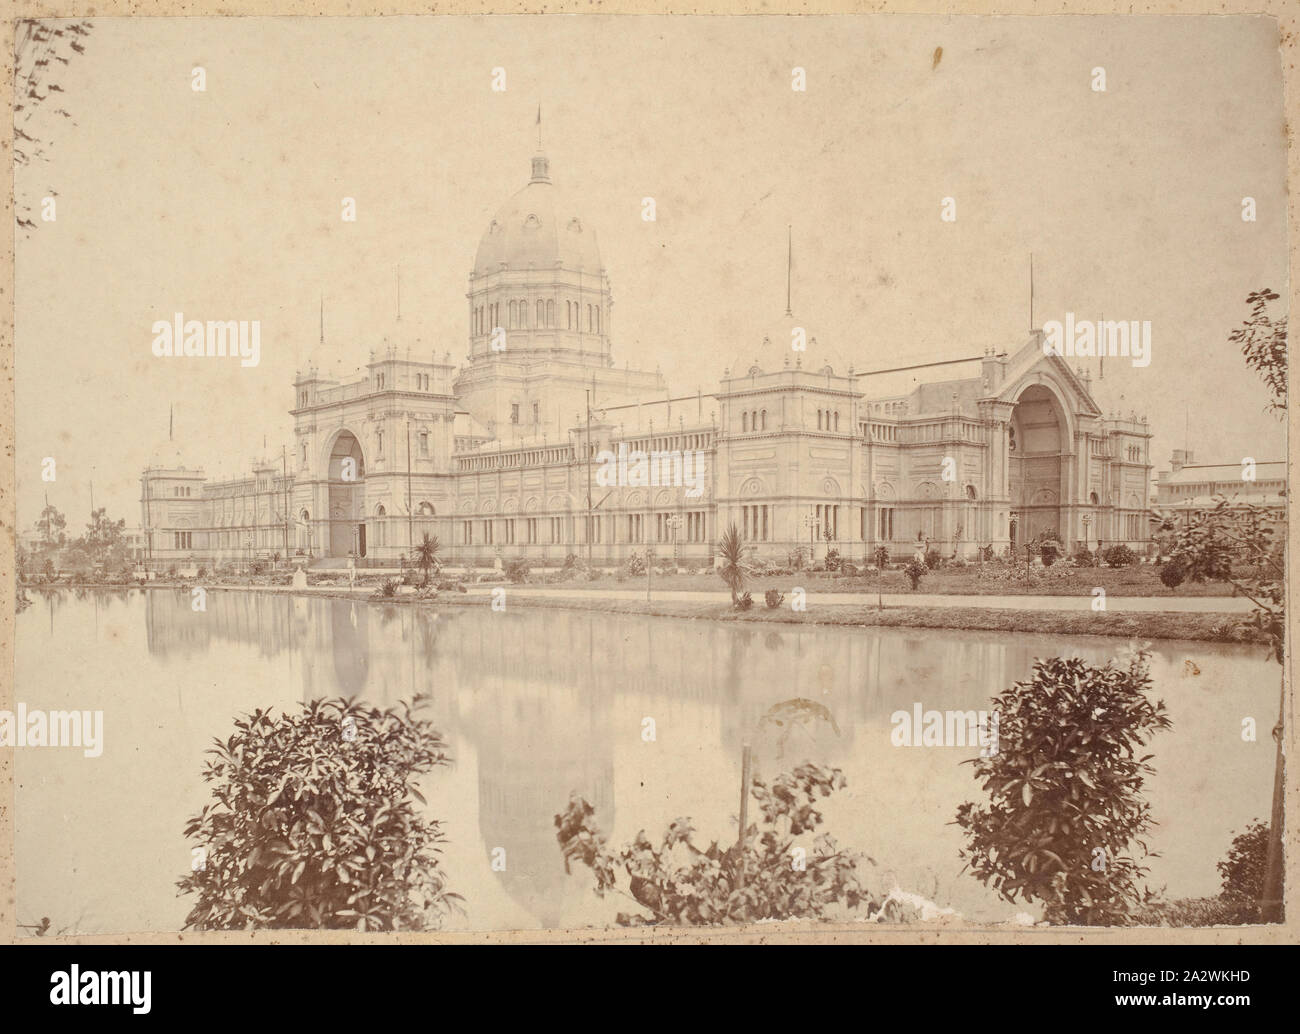 Photograph - Main Exhibition Building from Eastern Entrance, Nicholson Street, Carlton, 1880-1881, View of the main Exhibition Building from the south-east near Nicholson Street at the time of the 1880 Melbourne International Exhibition held at the Exhibition Buildings, between 1 October 1880 and 30 April 1881. Although the Exhibition Building itself had only been recently constructed, the foundation stone being laid in February 1879, the gardens themselves include more mature plants that were Stock Photo